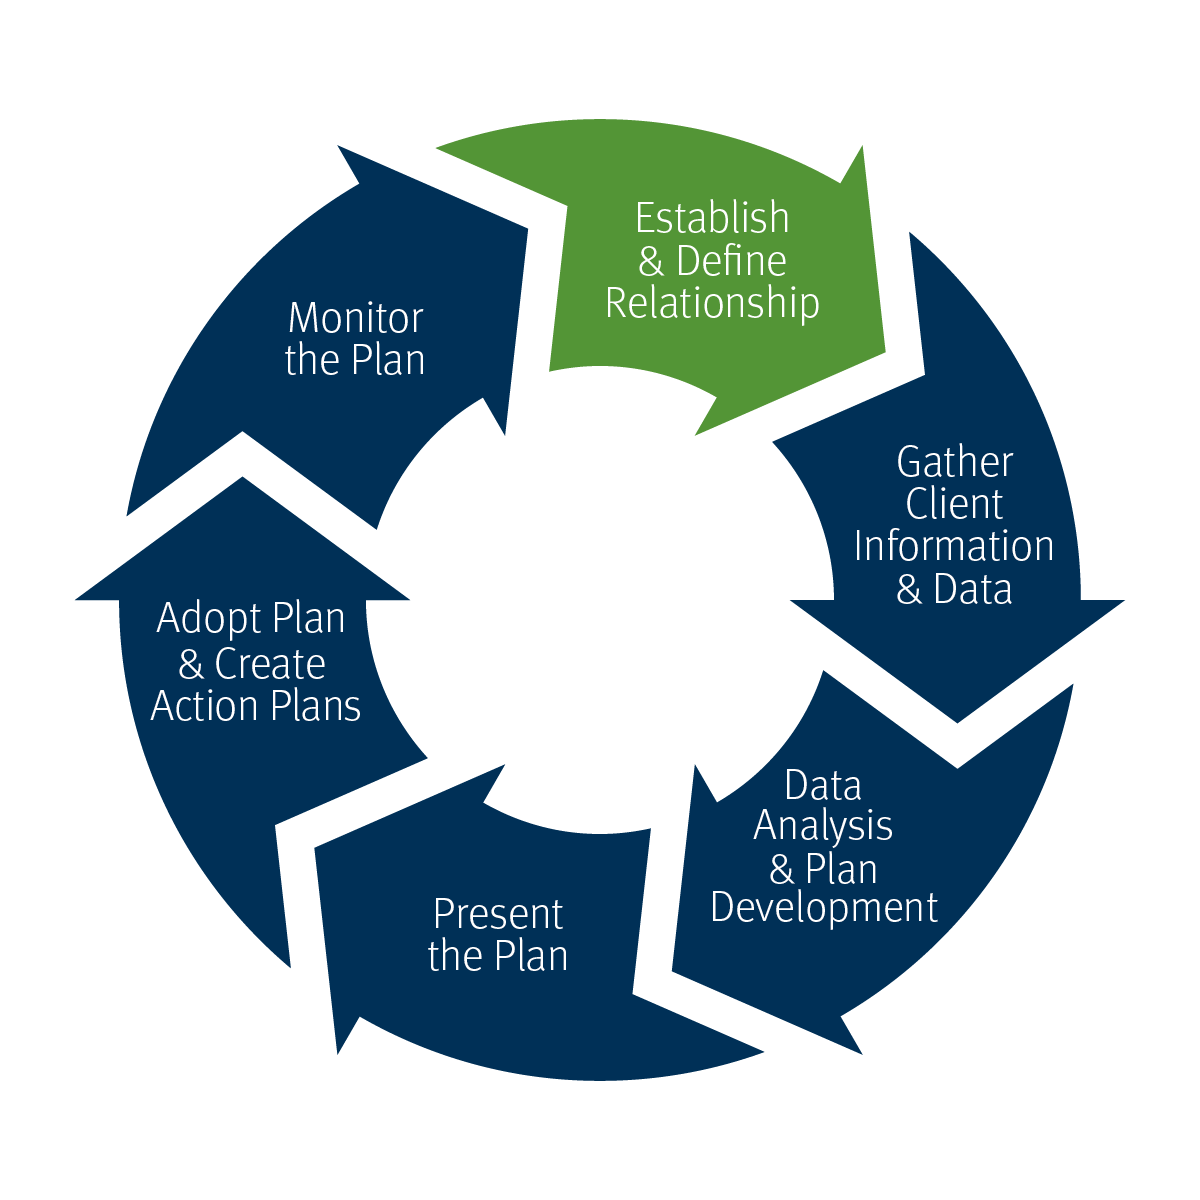 Our process wheel: Establish and define relationship, Gather client information and data, Data Analysis and plan development, Present the plan, Adopt plan and create action plans, Monitor the plan